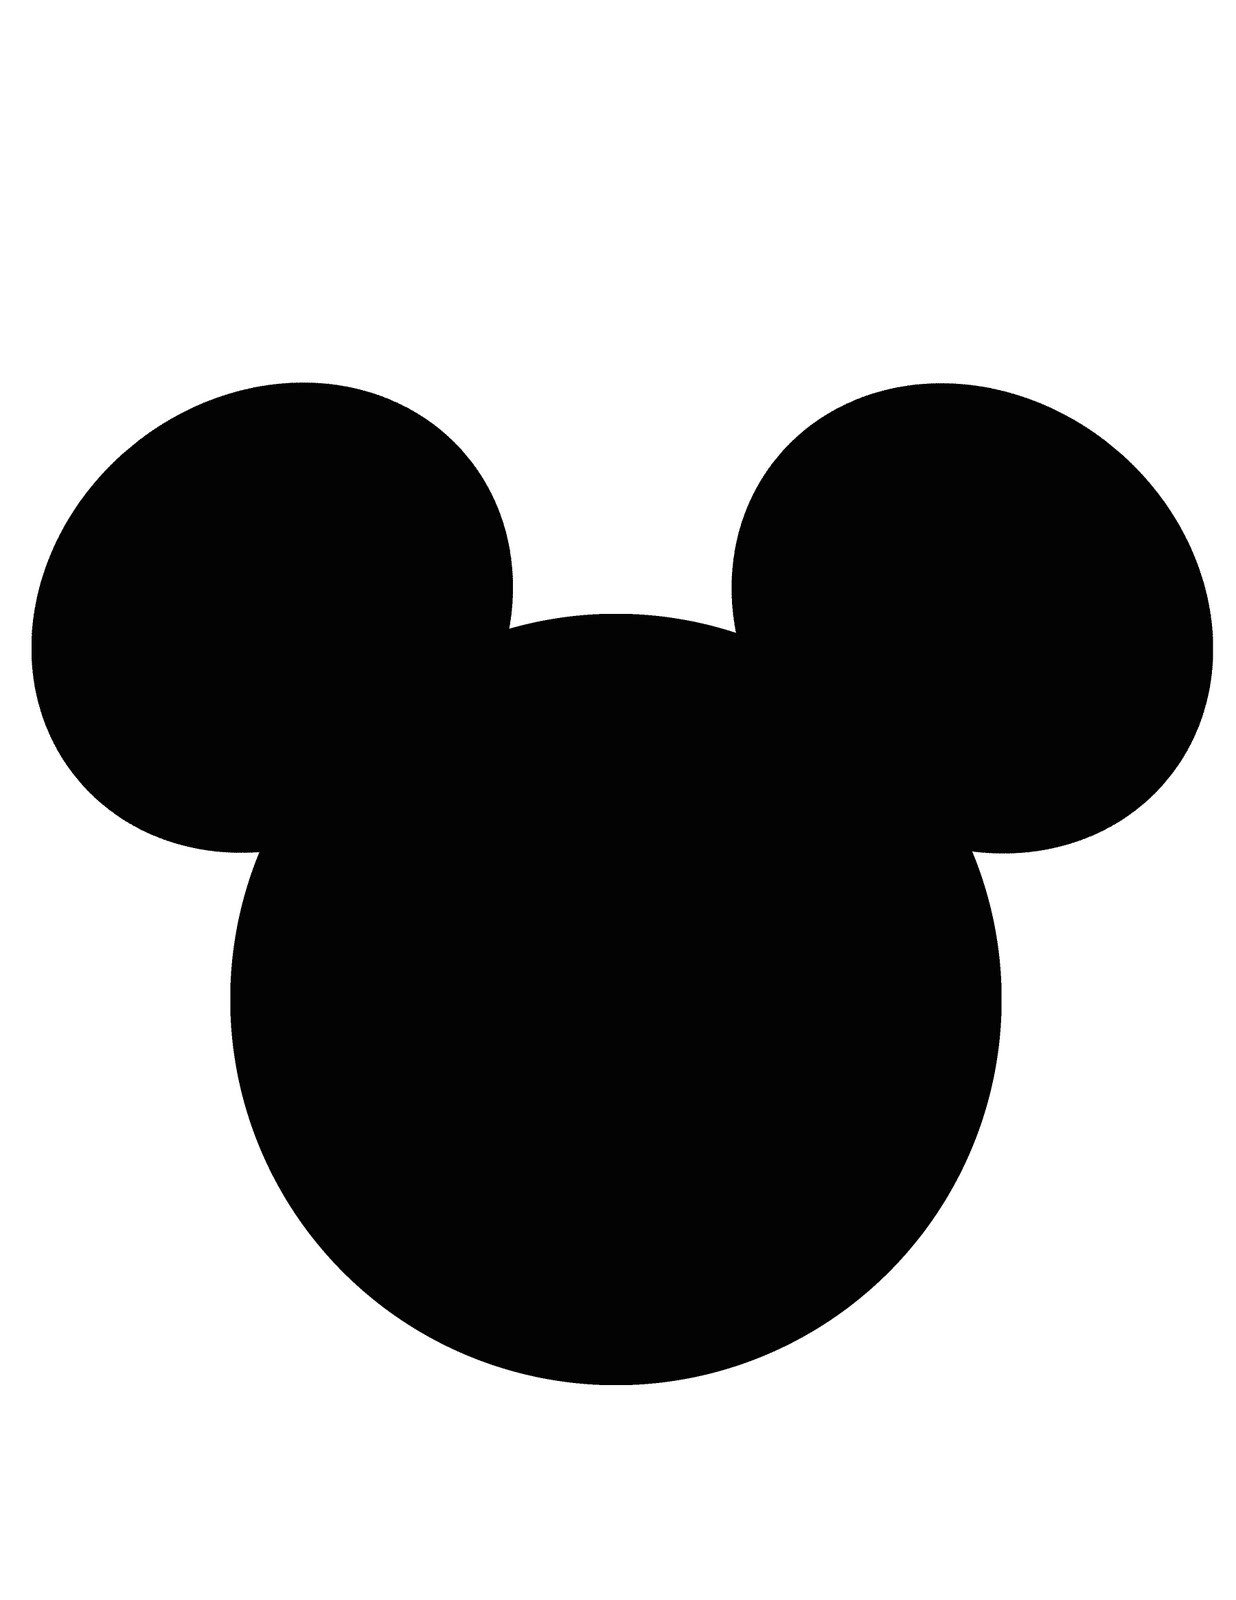 Mickey Mouse Head Template